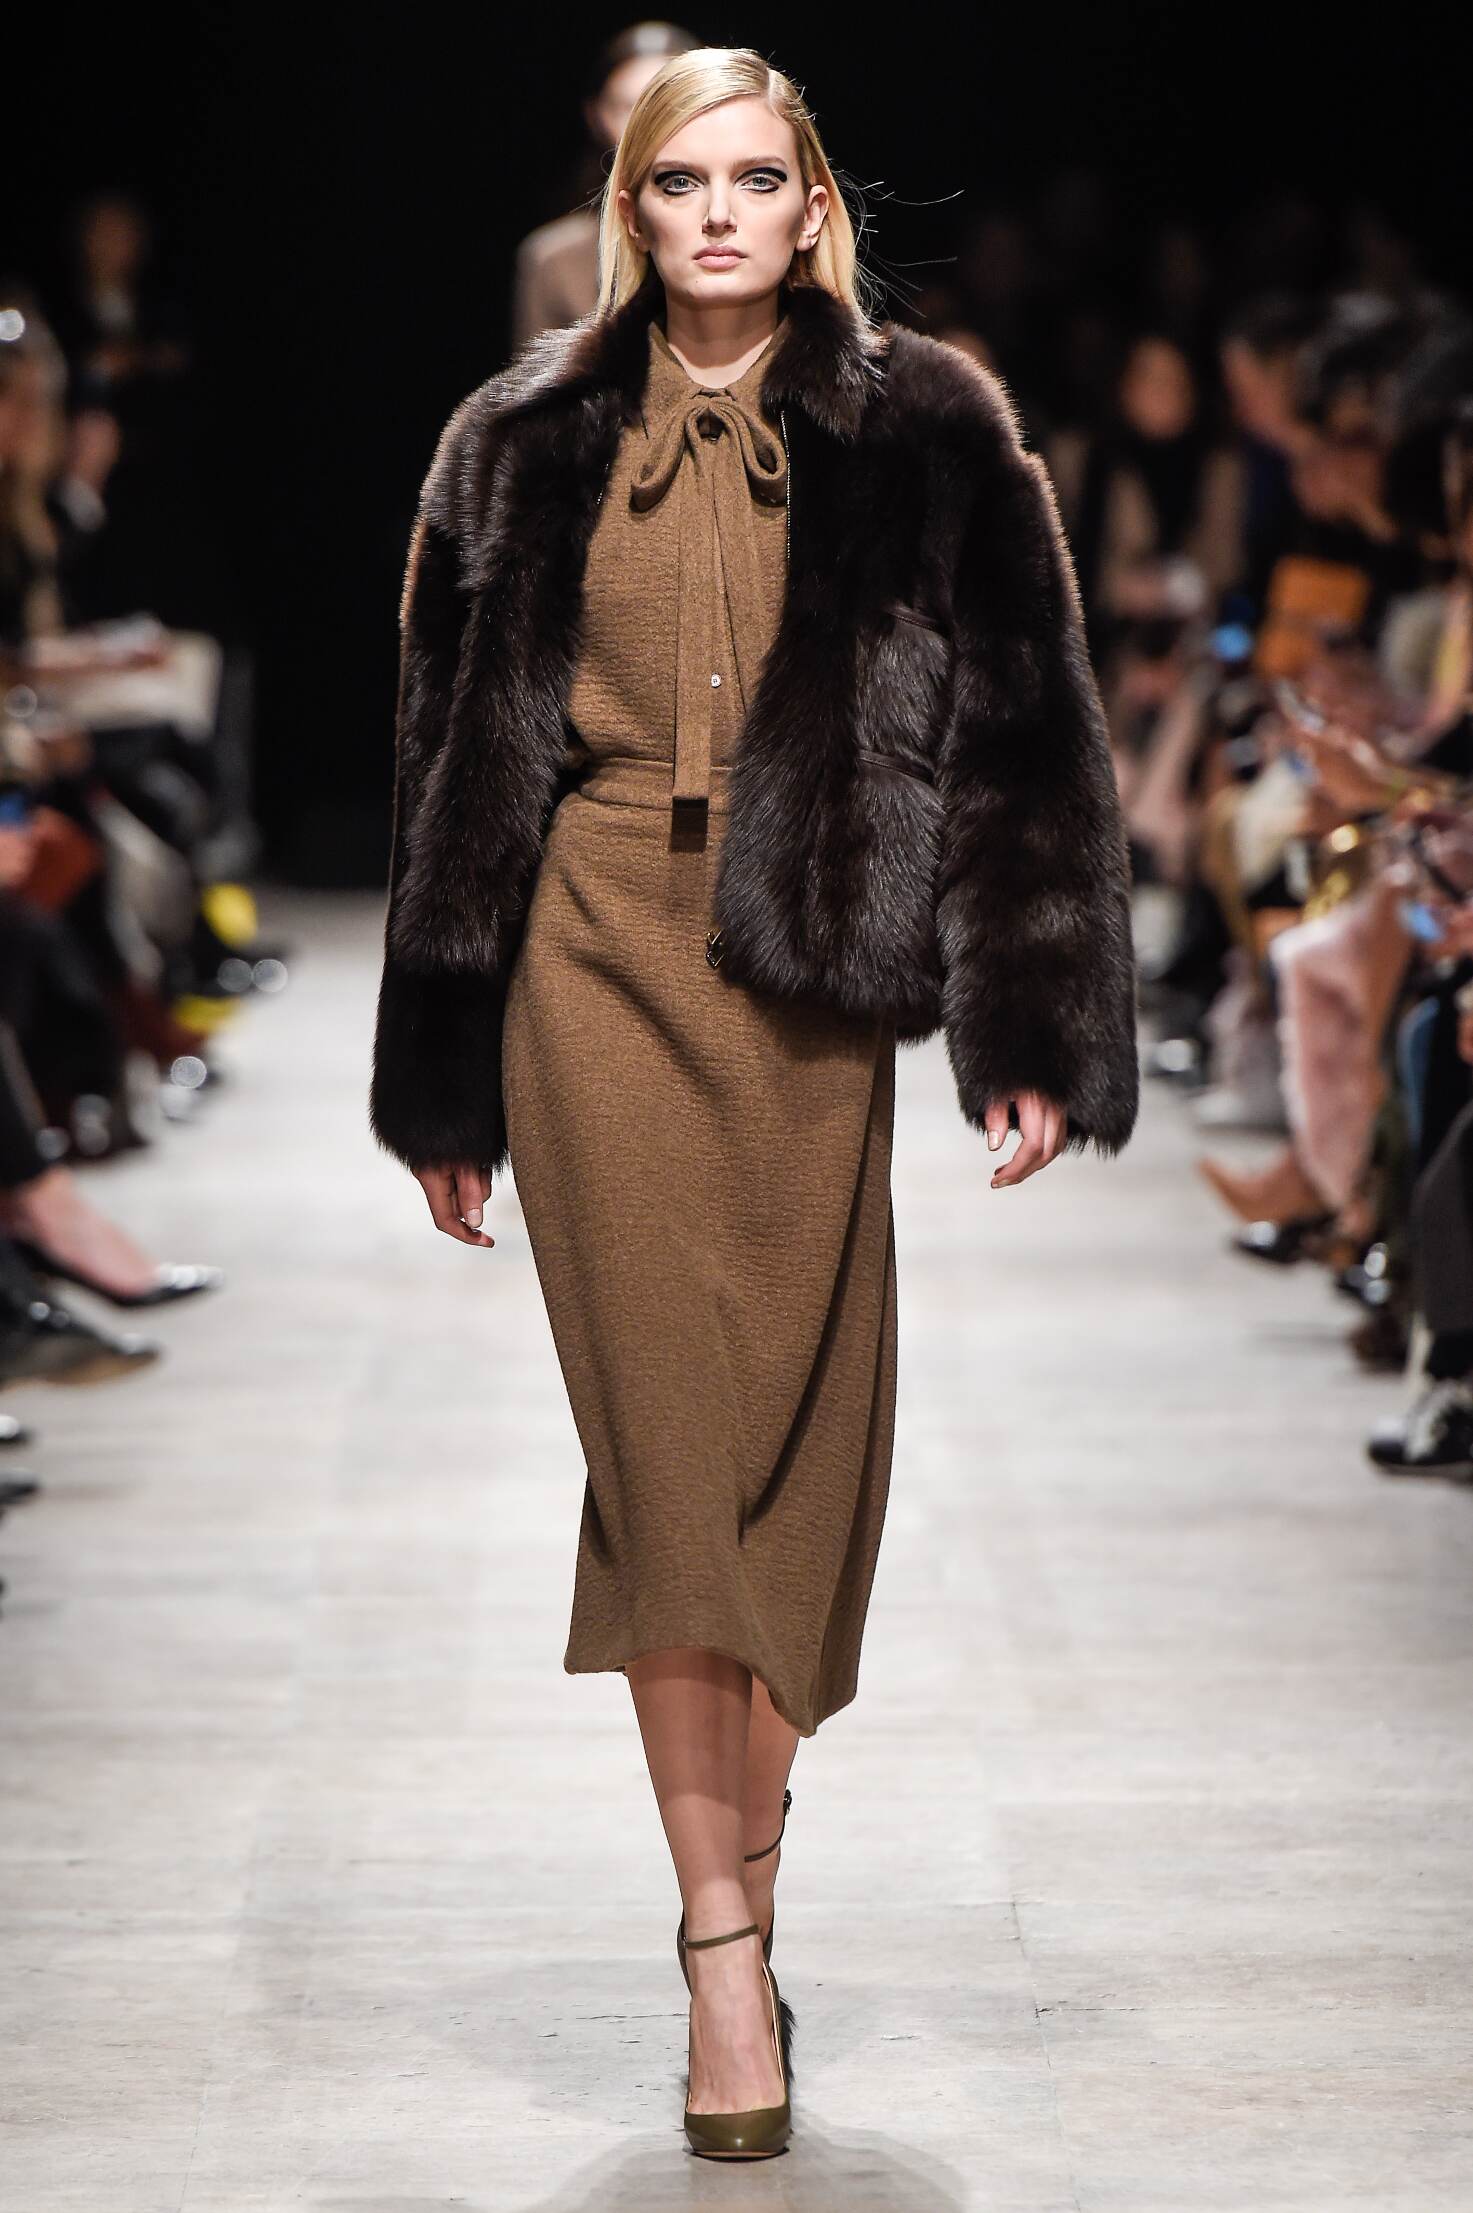 ROCHAS FALL WINTER 2015-16 WOMEN'S COLLECTION | The Skinny Beep